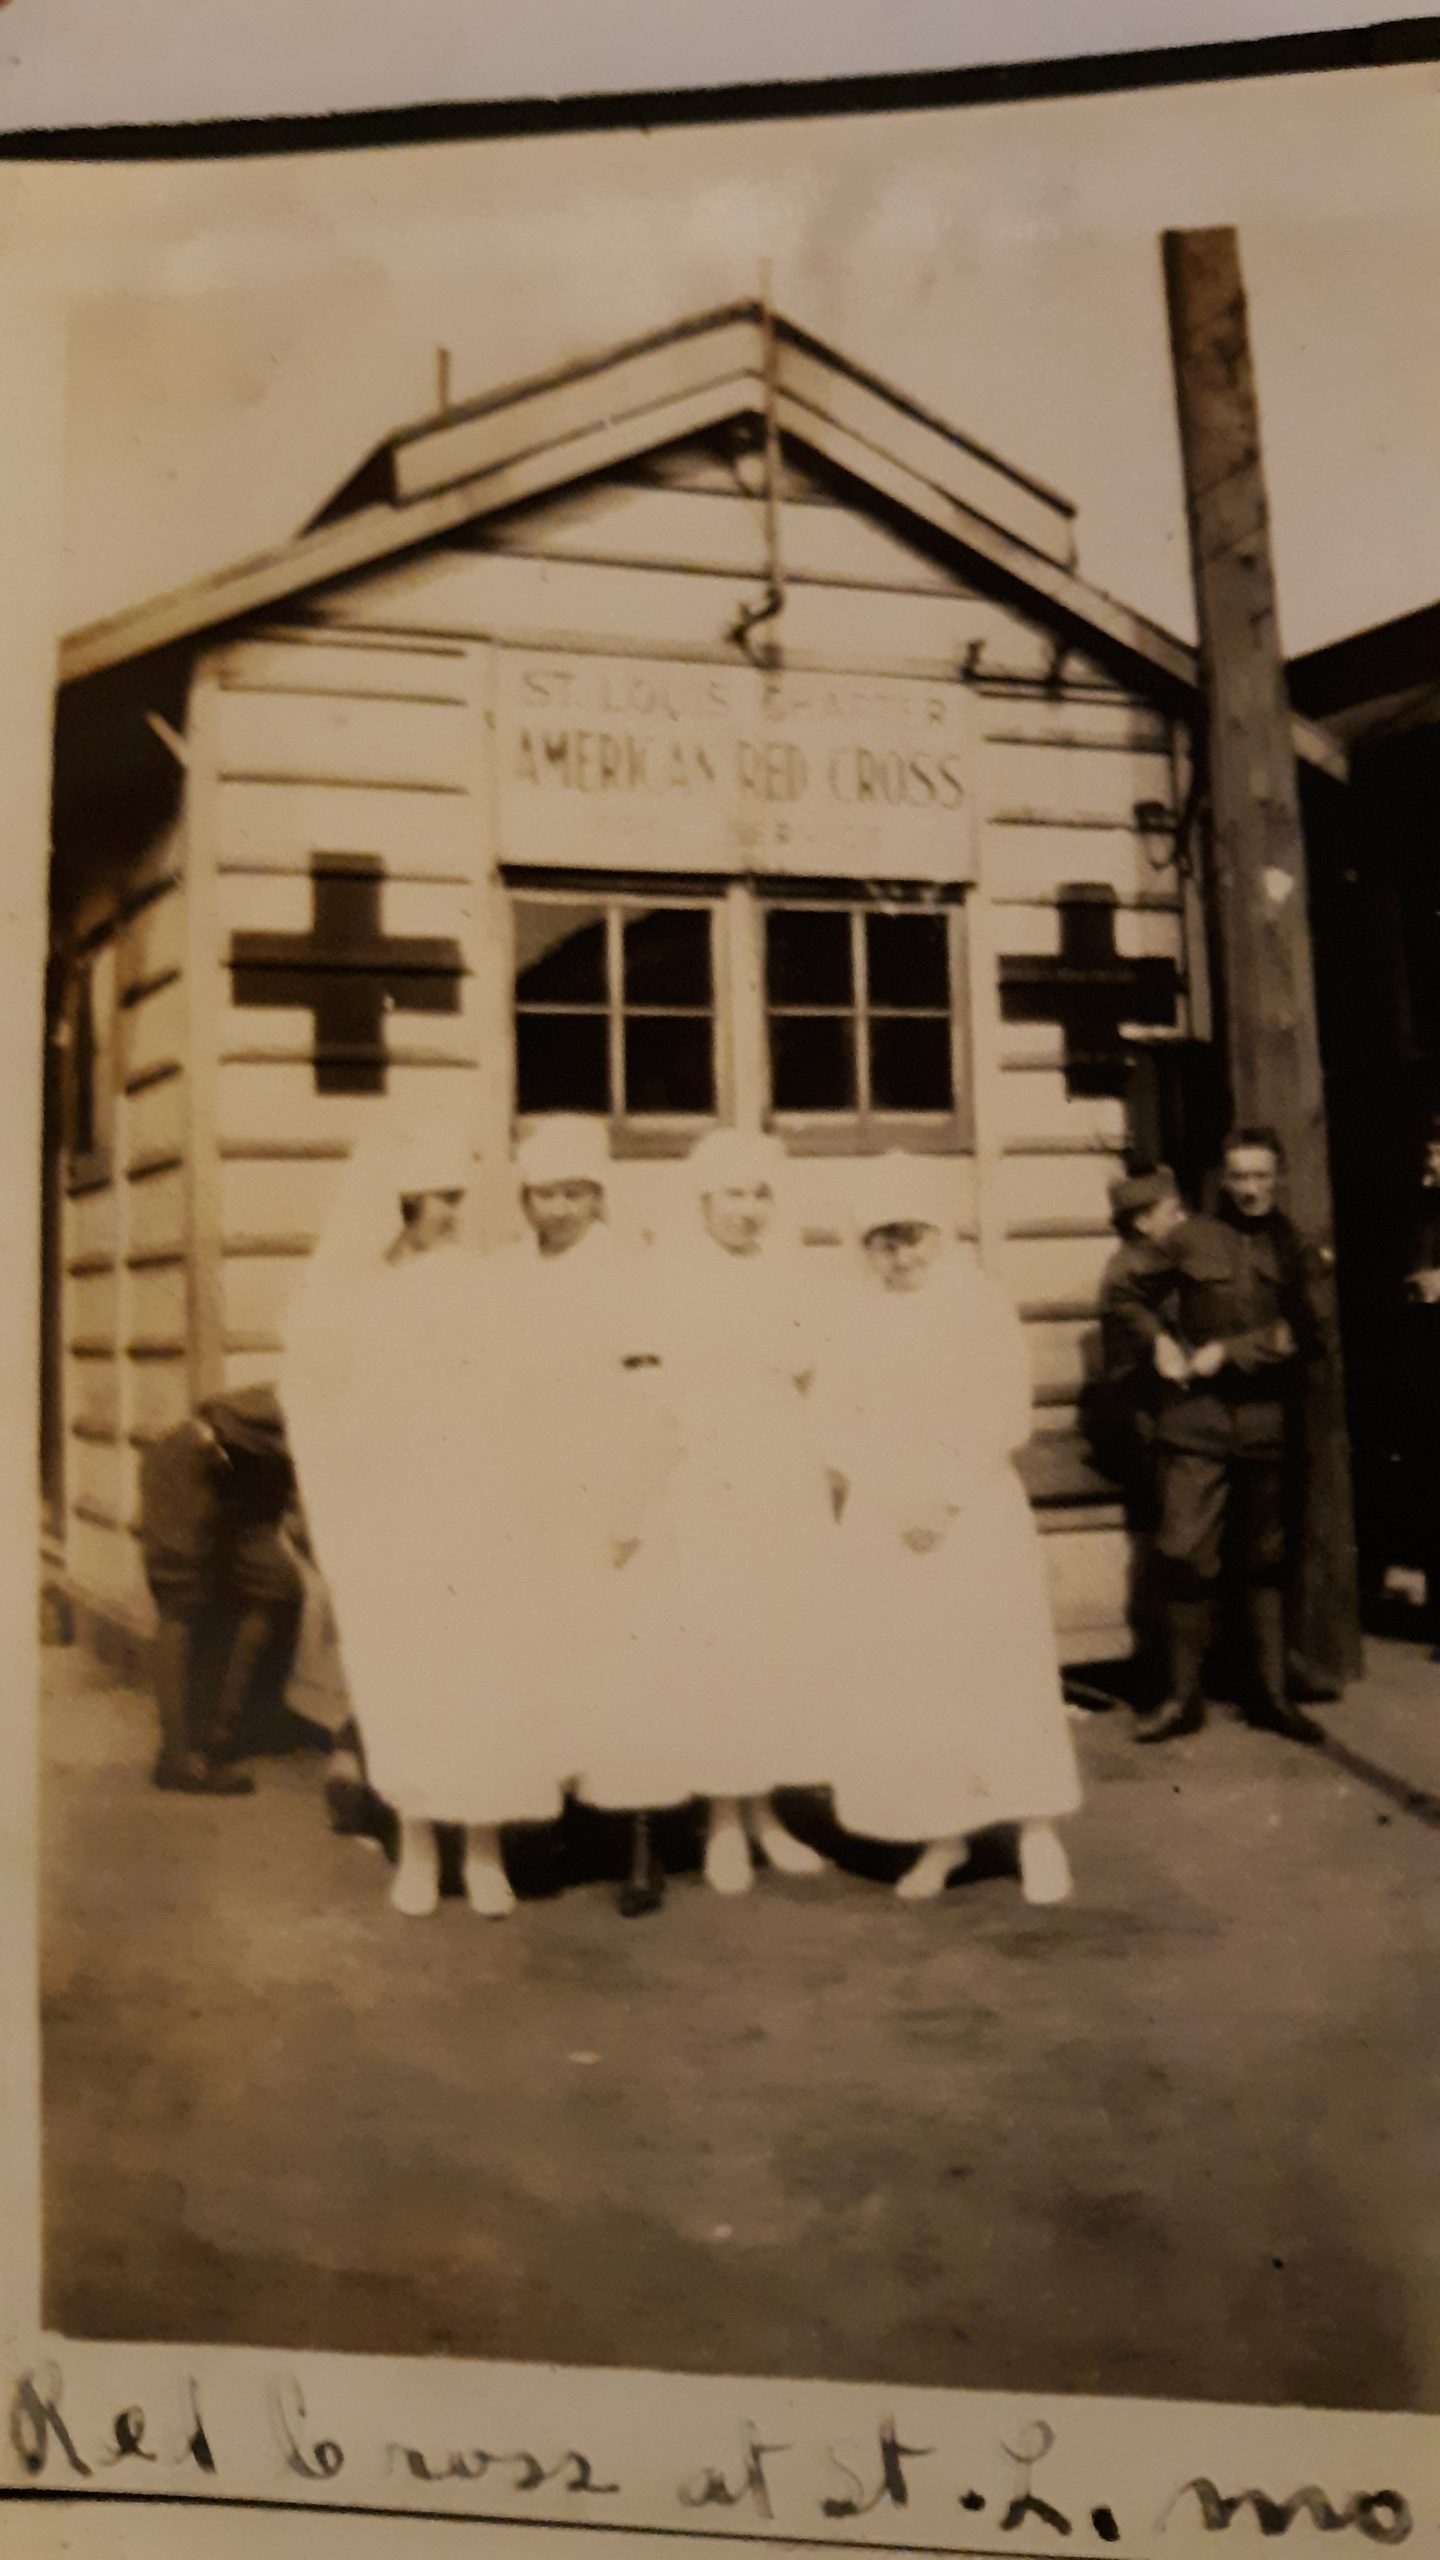 St. Louis Red Cross building and volunteers during World War 1